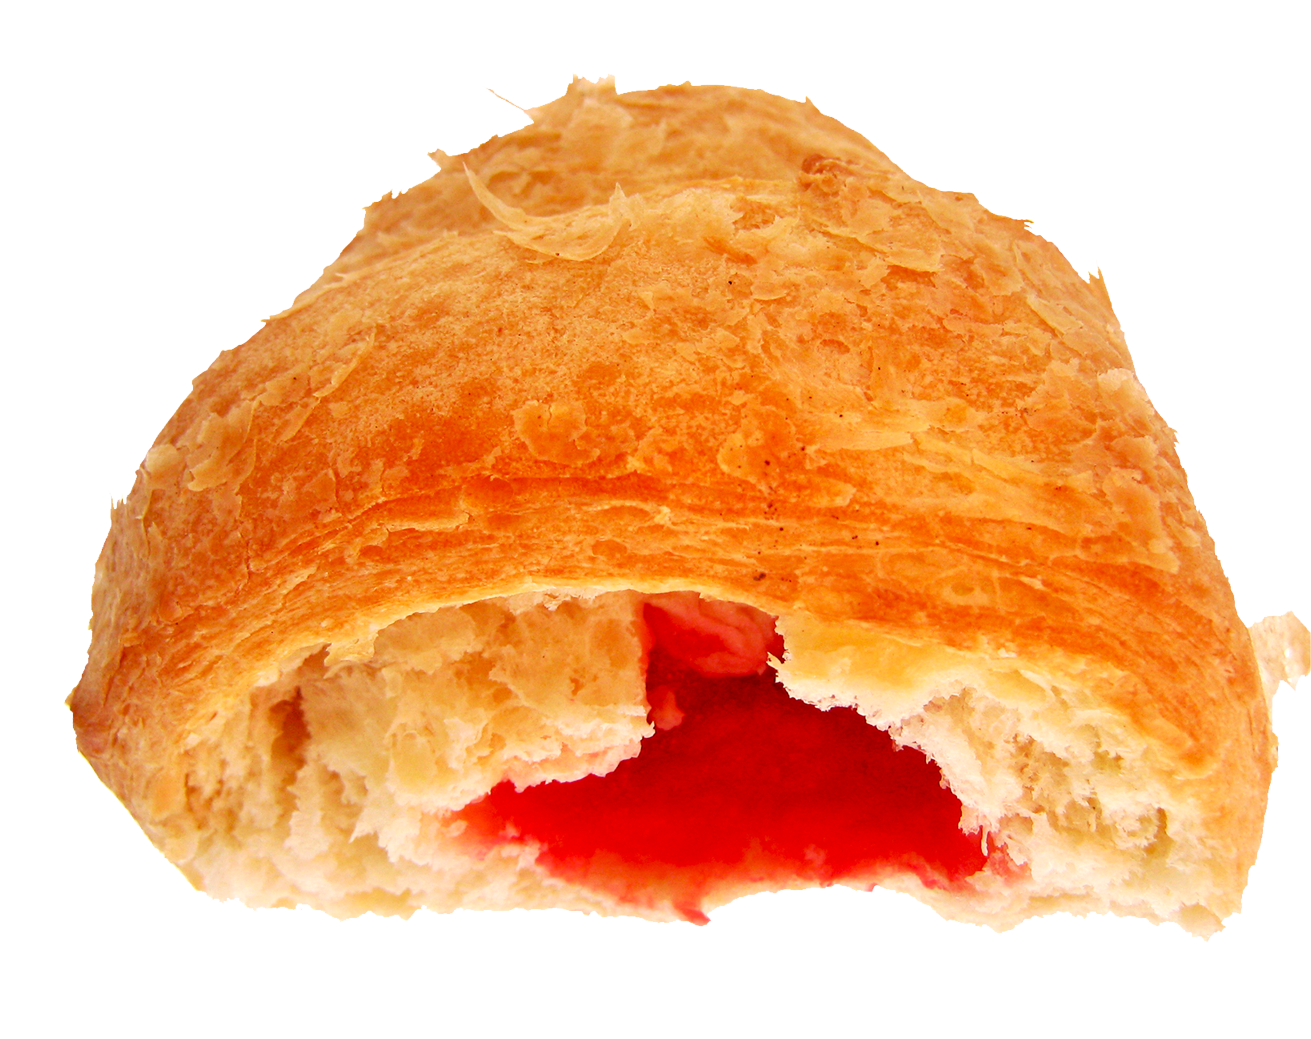 A Half Eaten Croissant With A Red Jam Inside